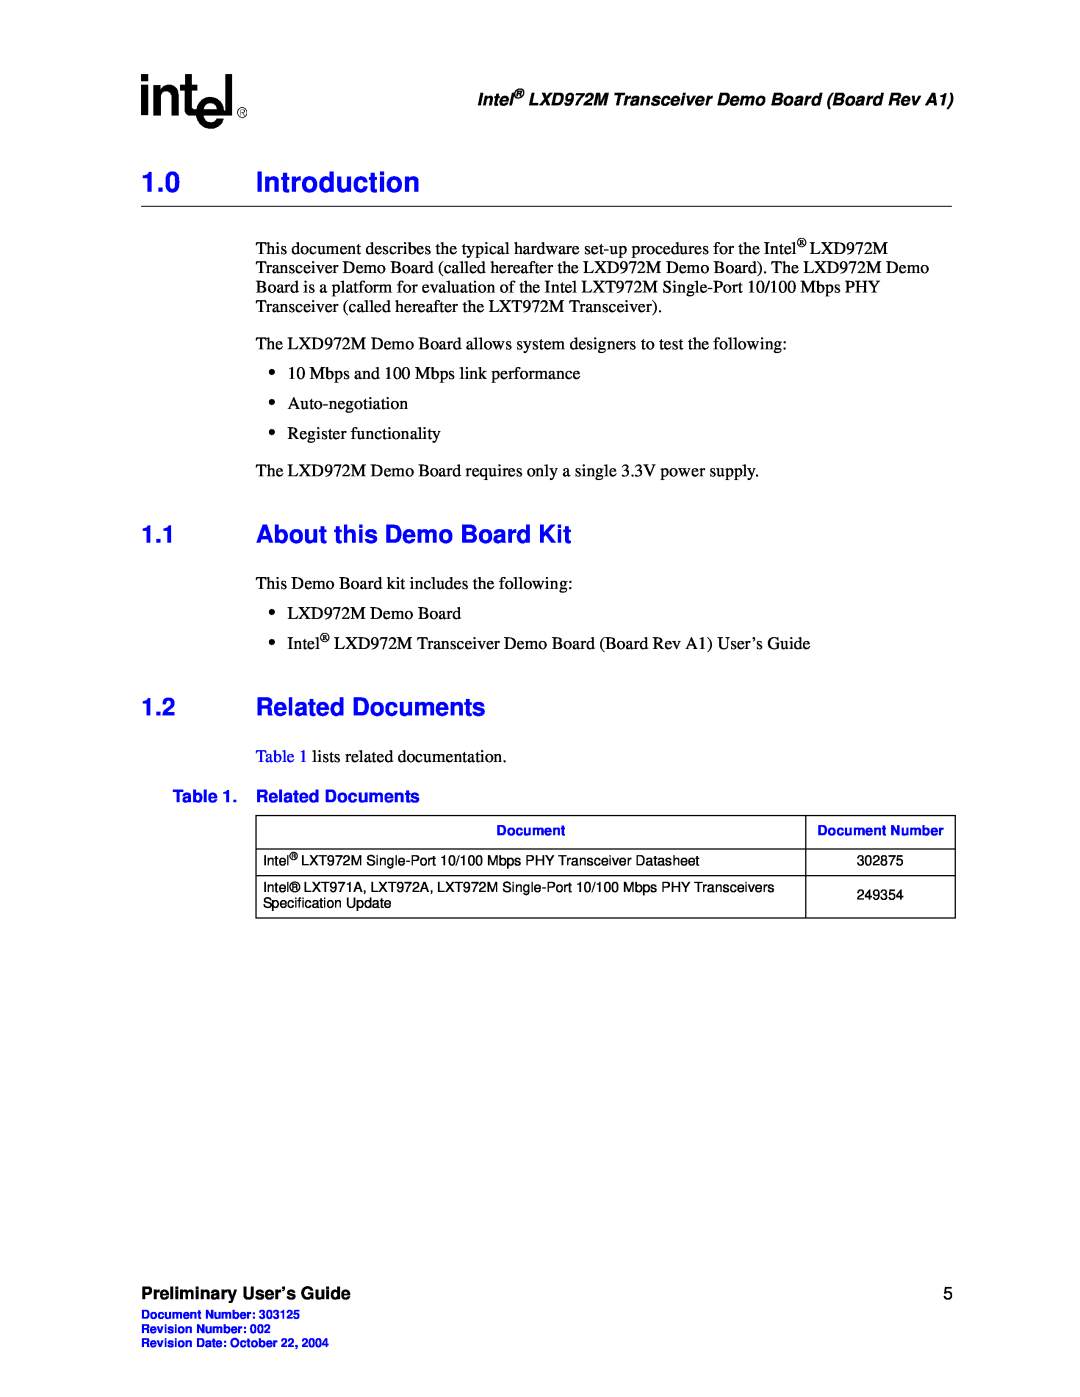 Intel LXD972M manual 1.0Introduction, 1.1About this Demo Board Kit, 1.2Related Documents, Preliminary User’s Guide 